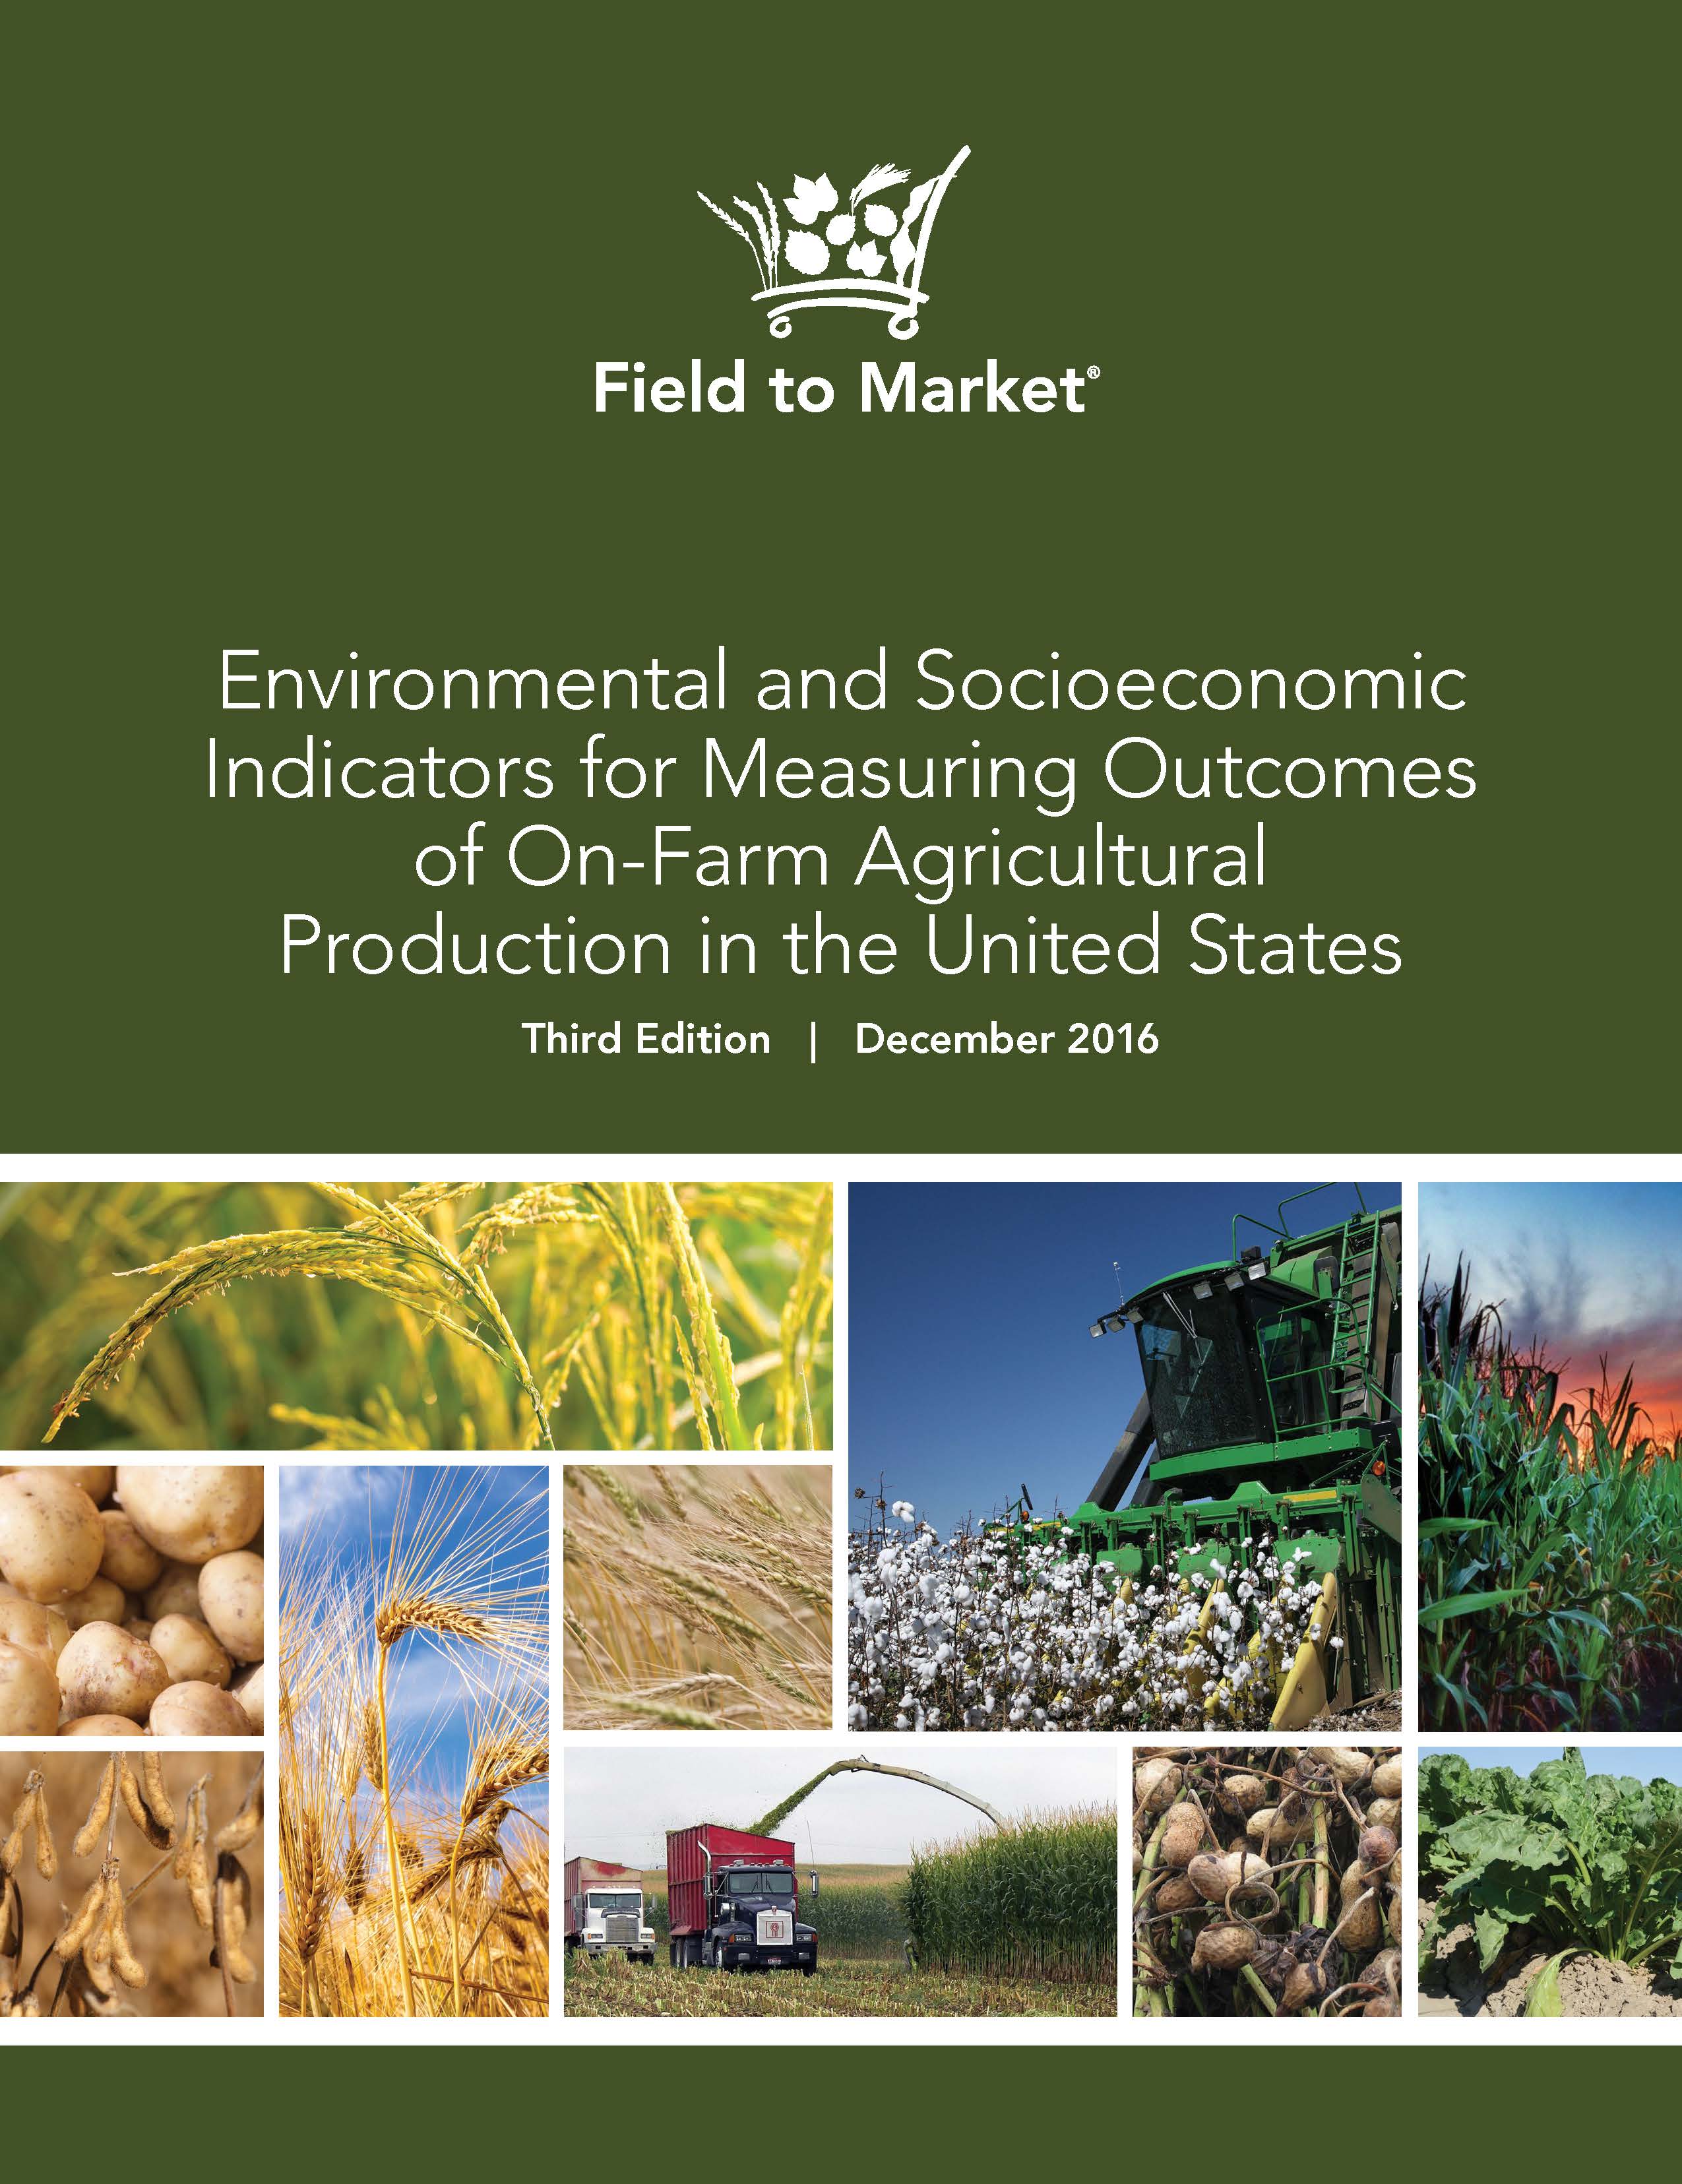 The third edition of Field to Market's National Indicators Report provides updated analysis on the sustainability performance of 10 crops over a 36-year period at a national level.